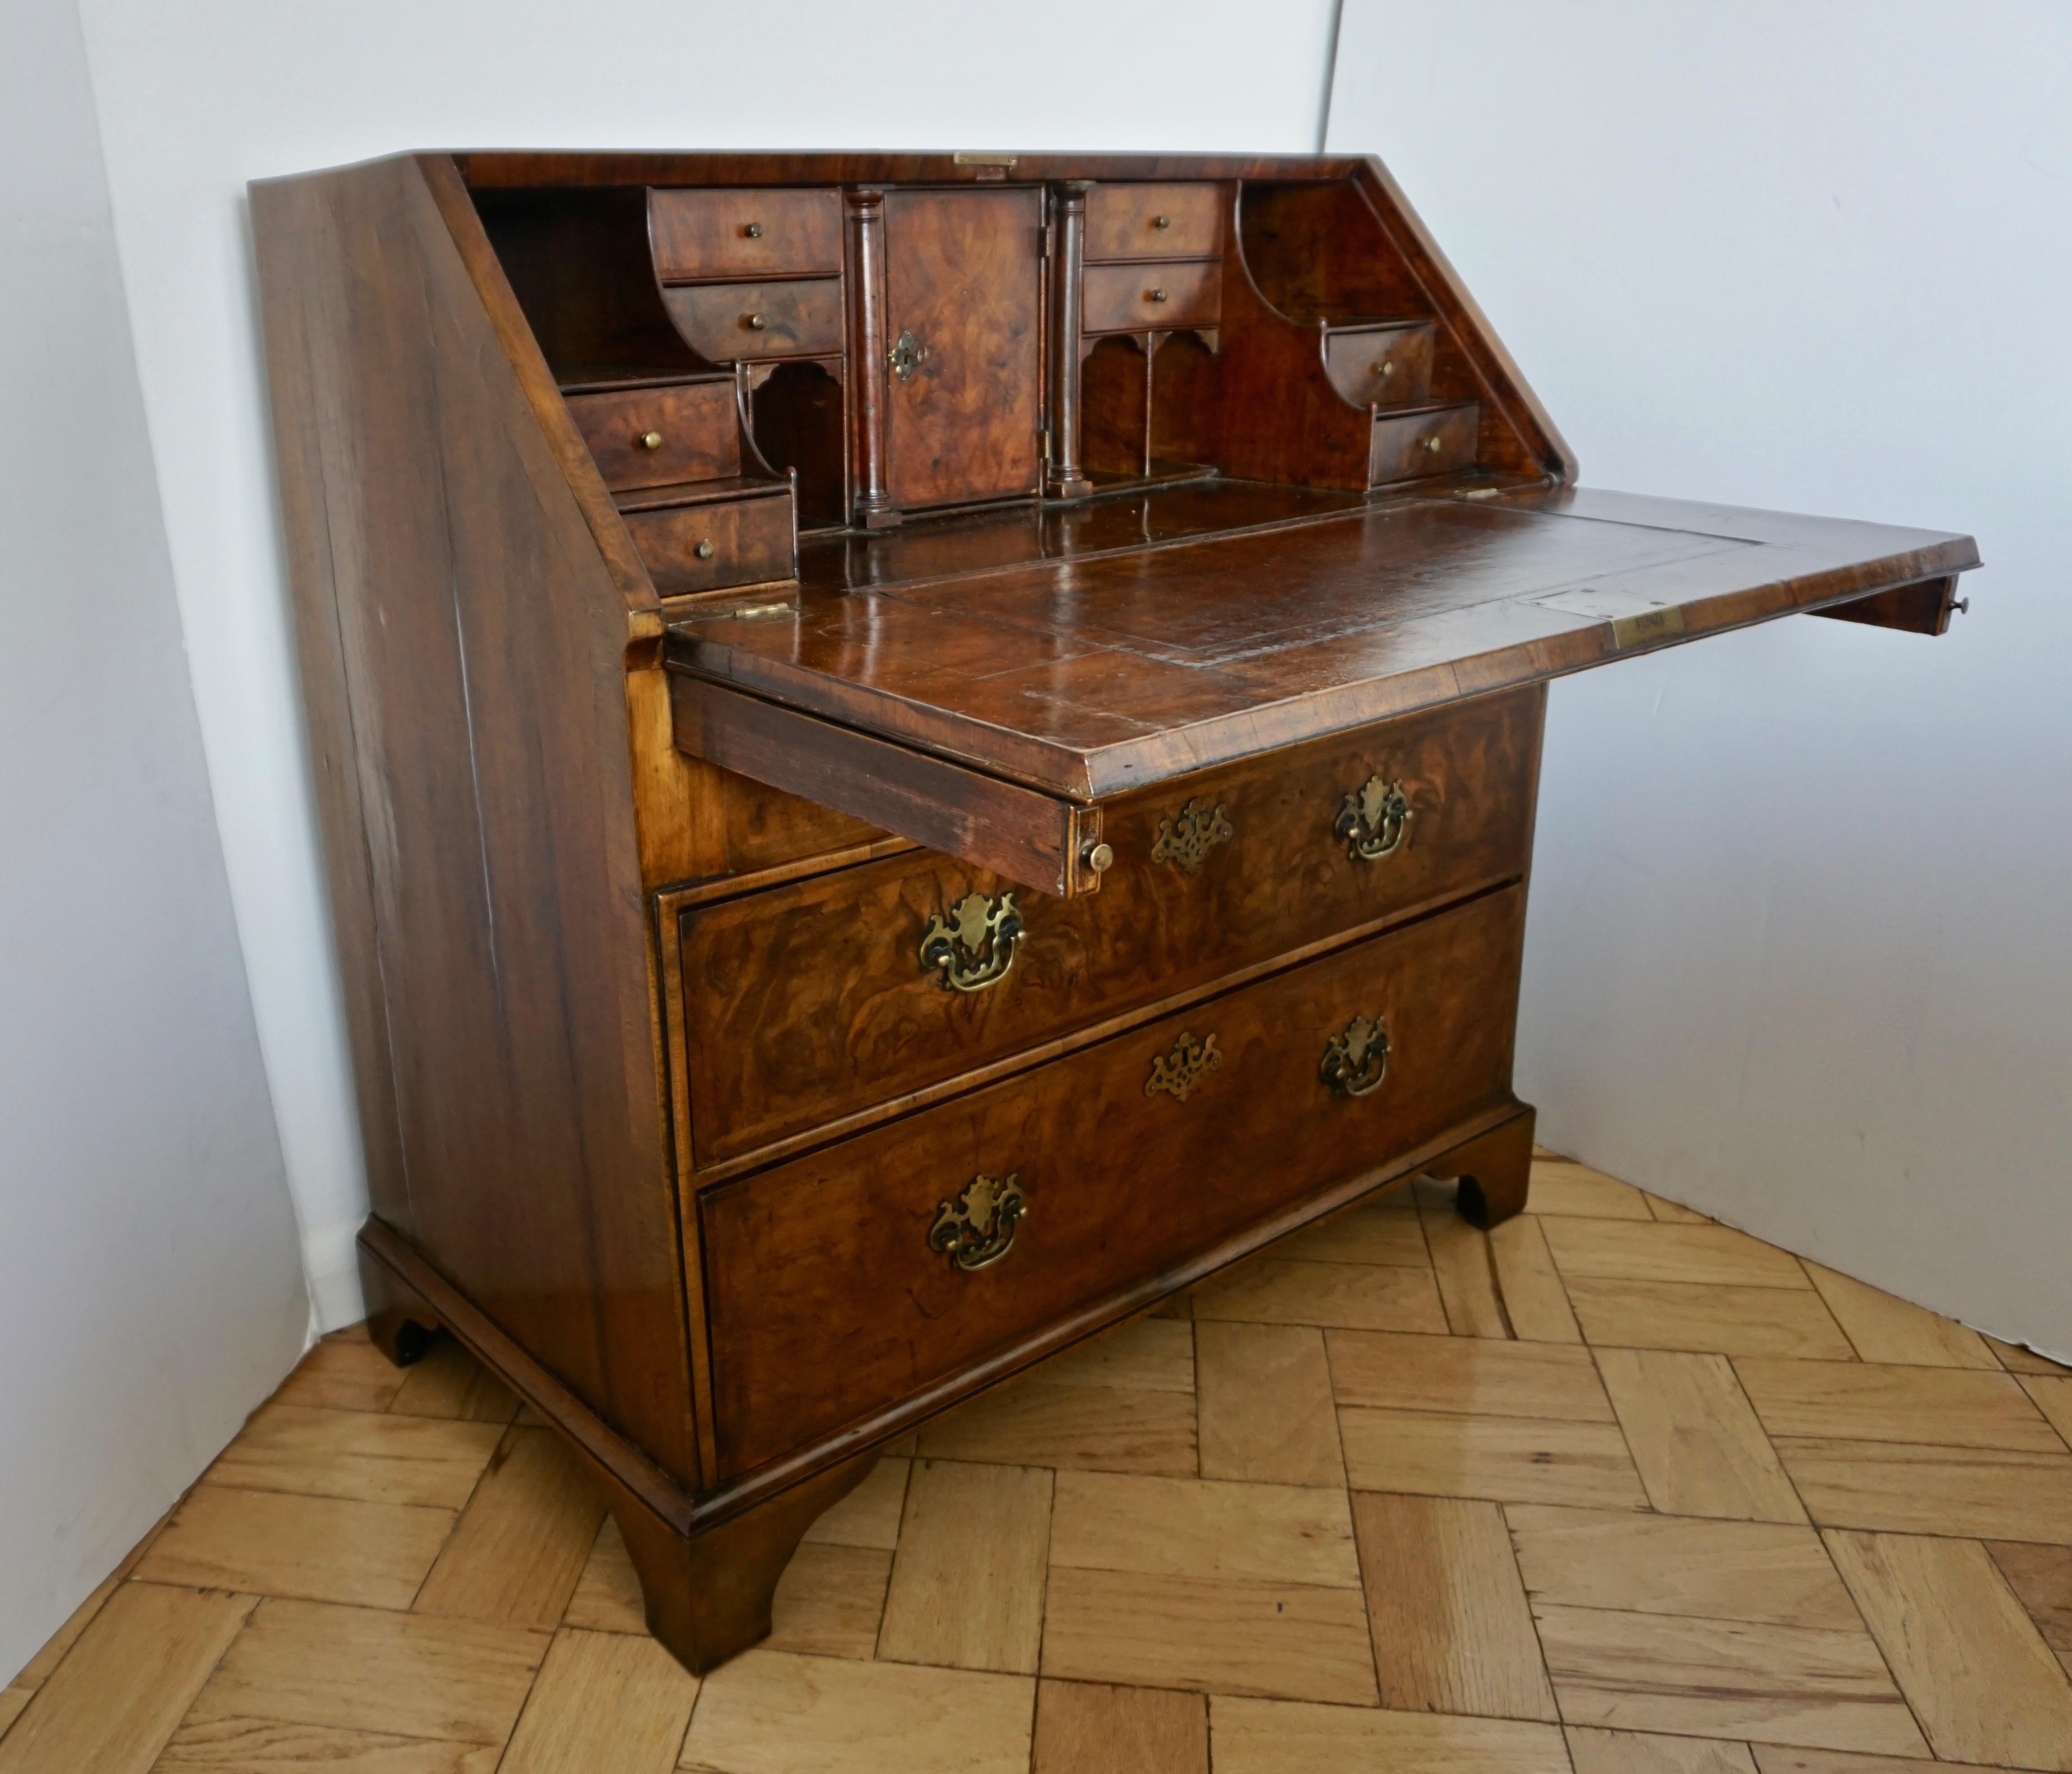 Exceptional condition for this English secretaire/chest/desk of George I period. The finish in figured burl walnut adds aesthetic beauty to the history of this piece acquired by Cosulich Interiors & Antiques from a collector in Yorkshire. Georgian